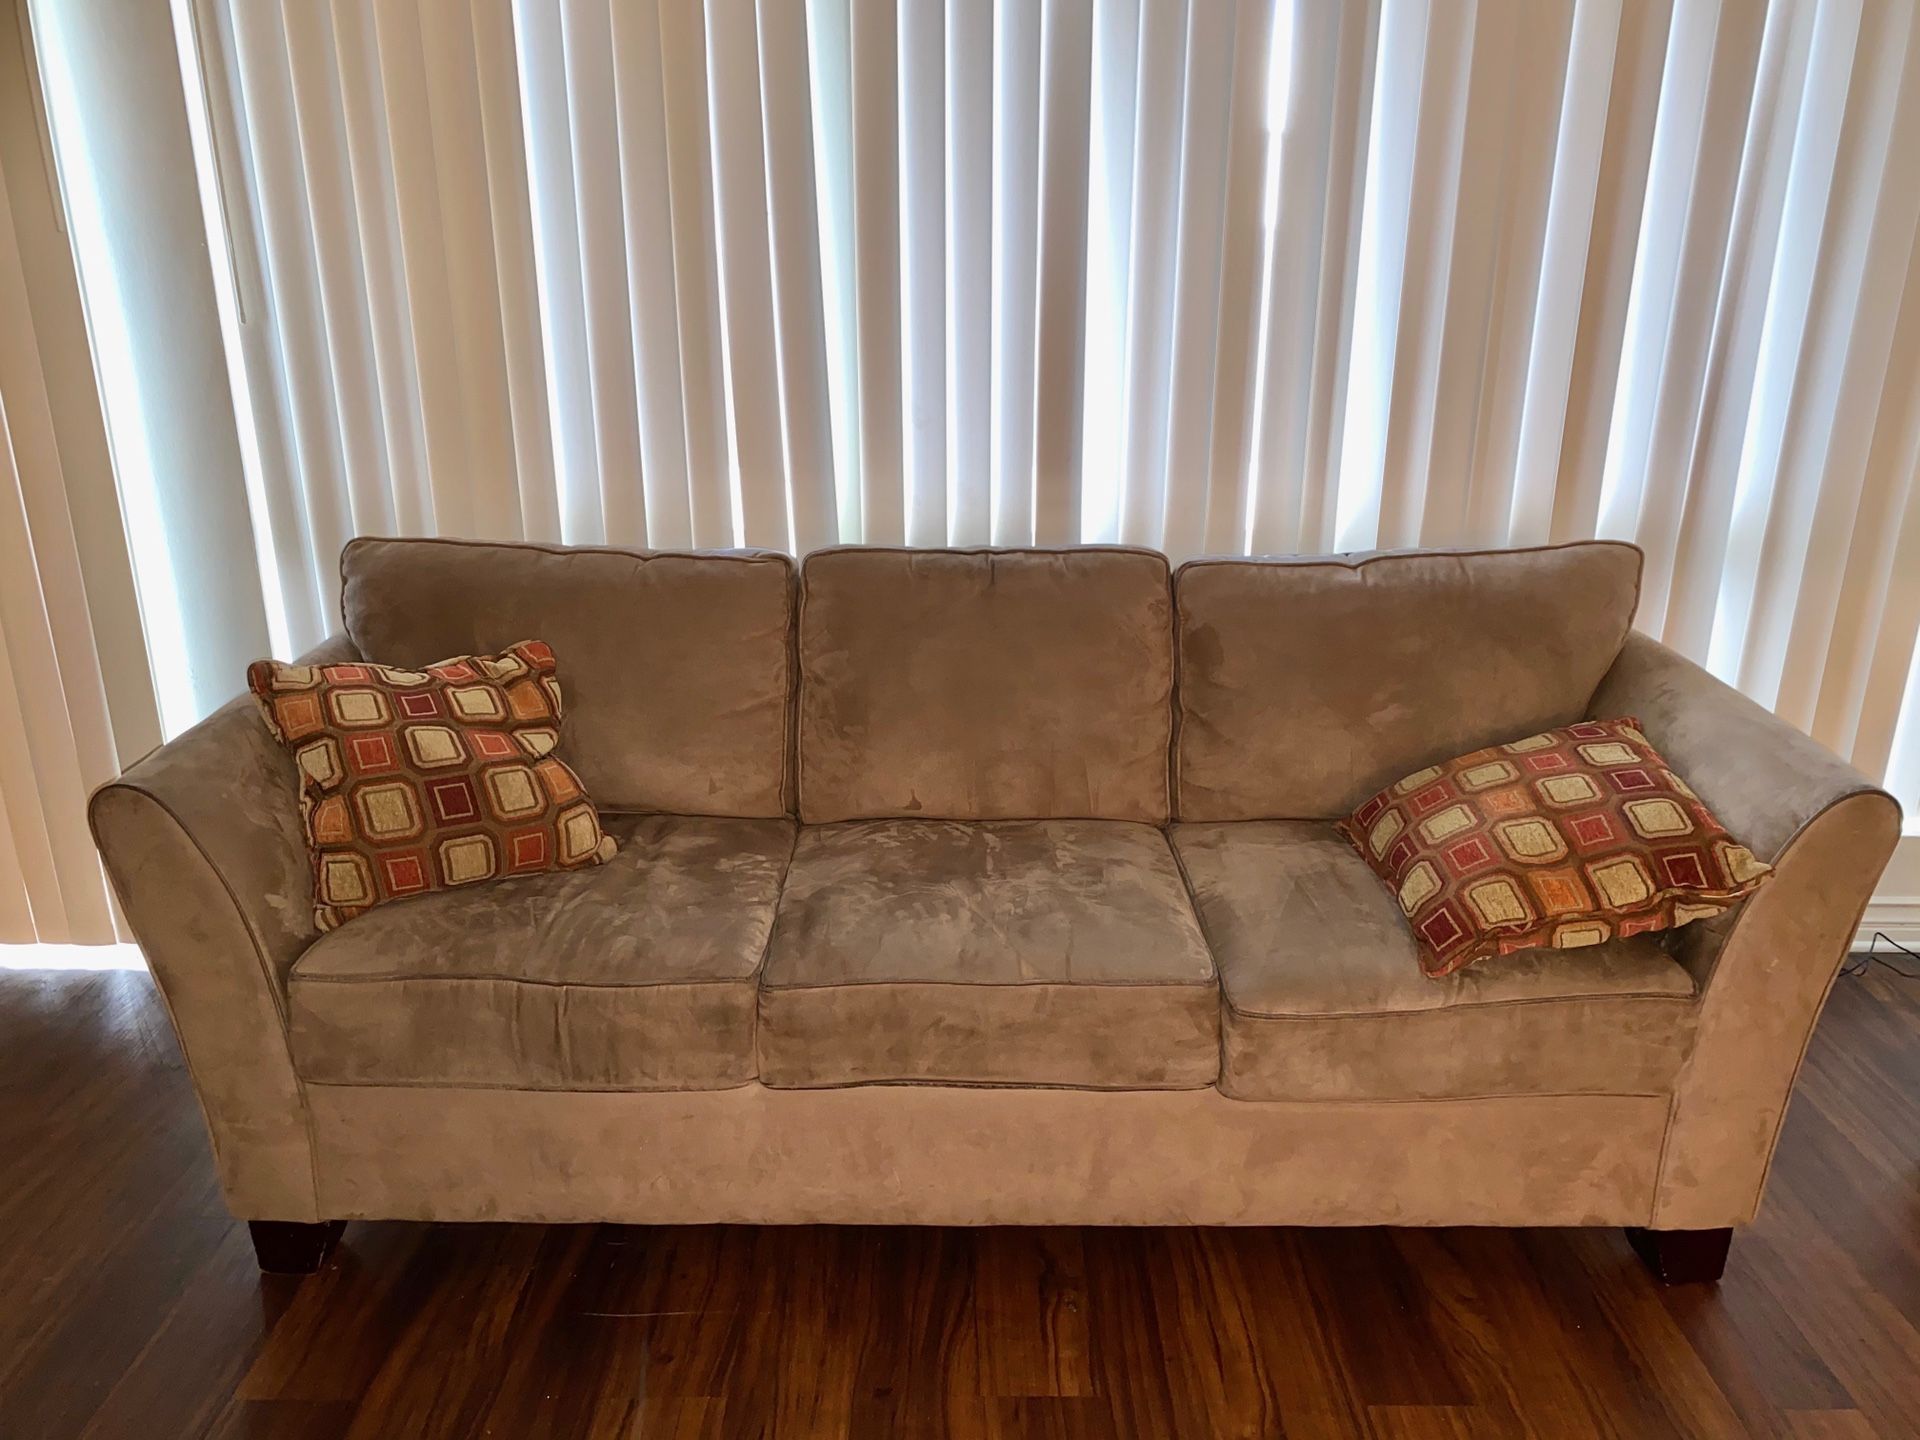 Set of 2 couches